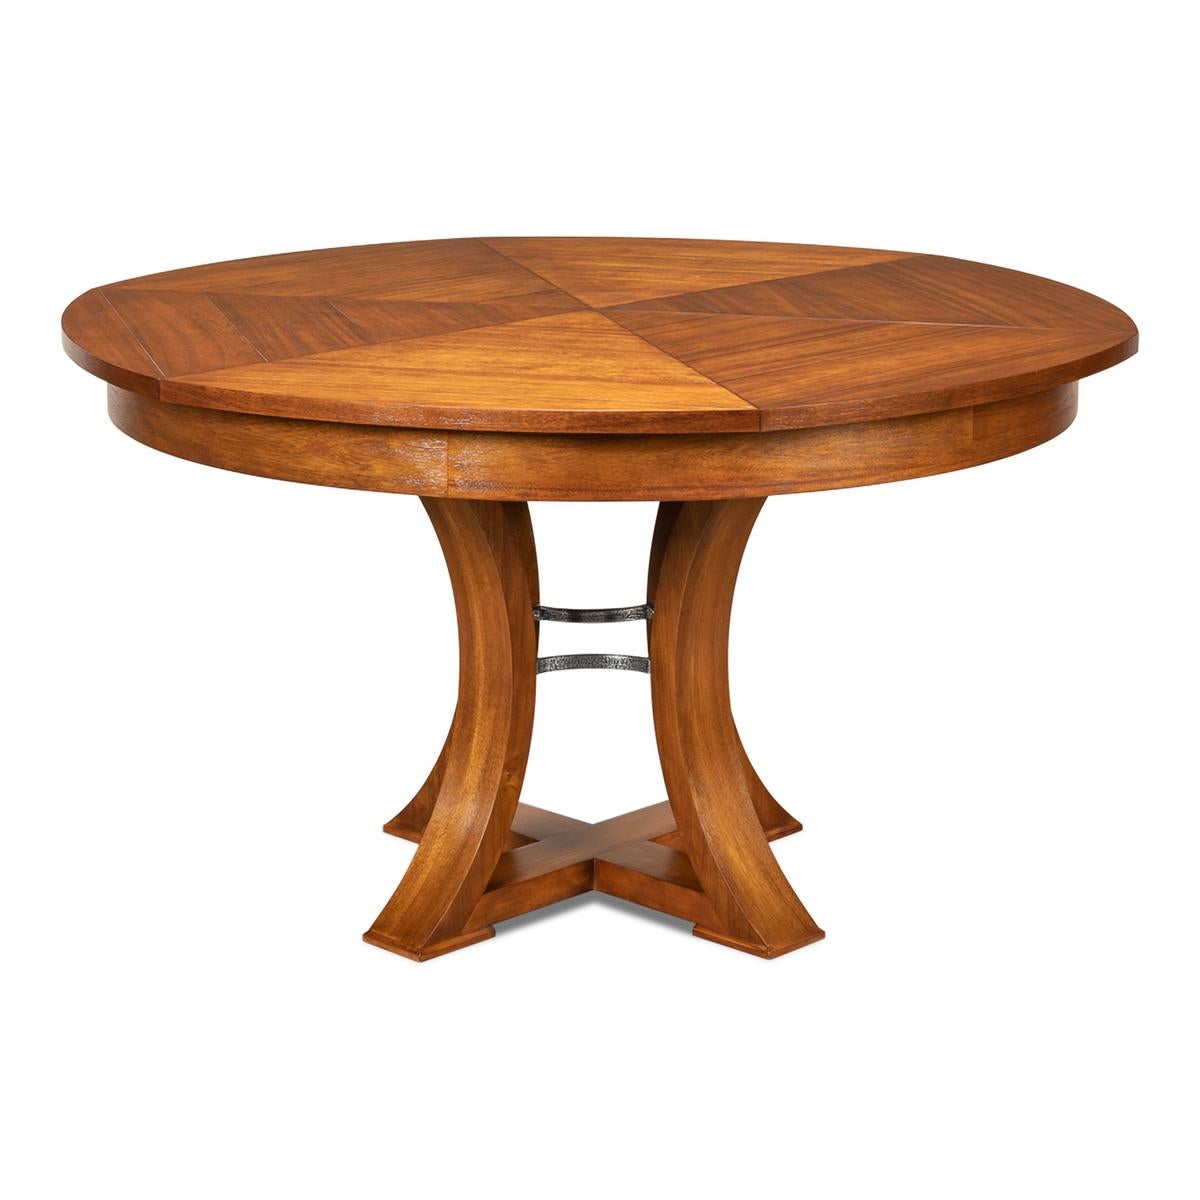 A modern transitional style round extending dining room table. Warm acacia wood top in our aged tobacco finish with iron supports to the simple geometric form base. The table opens and extends to 70